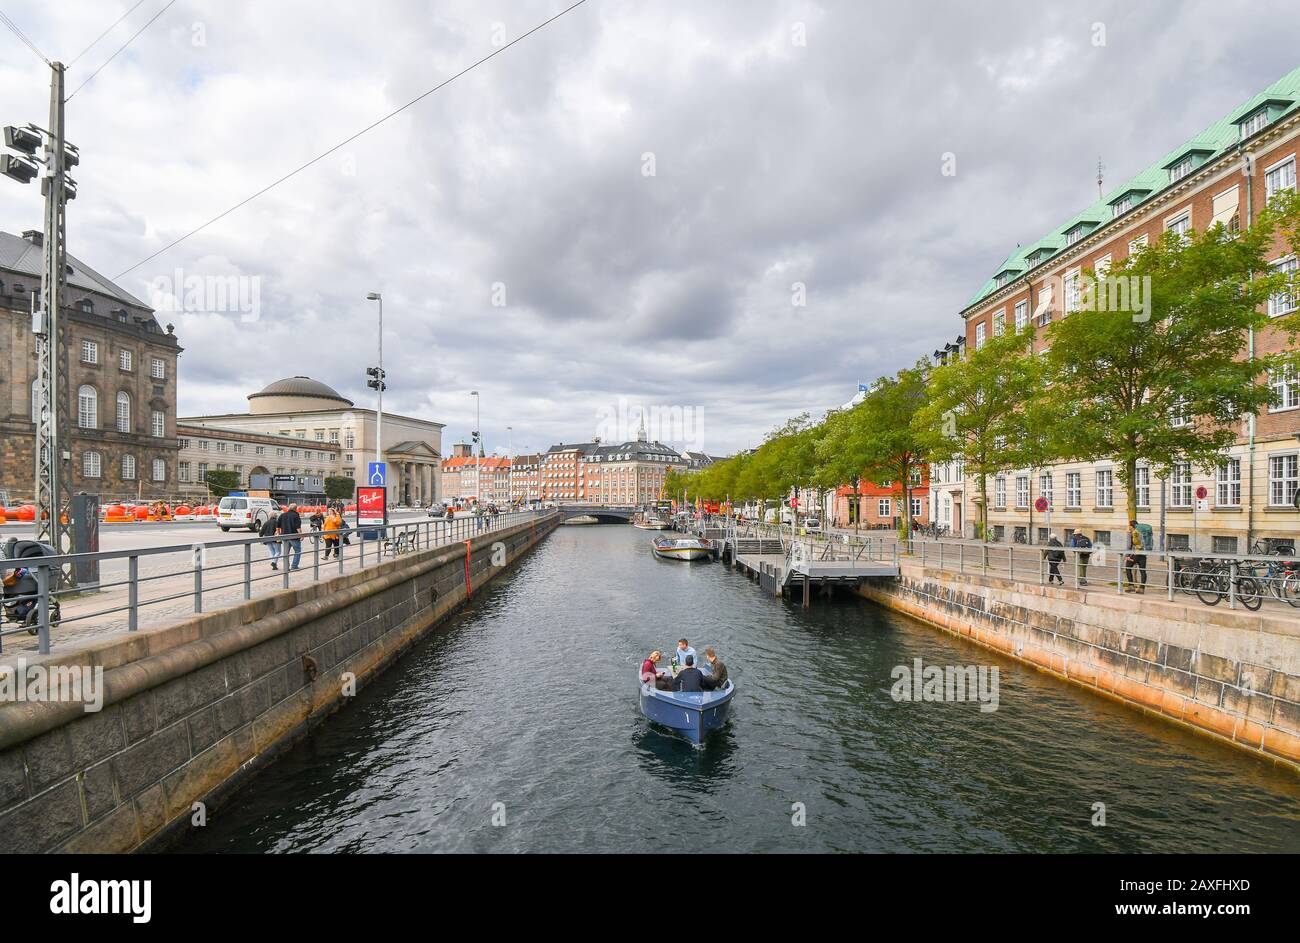 A group of people cruise a river canal in the urban center of Copenhagen, Denmark. Stock Photo